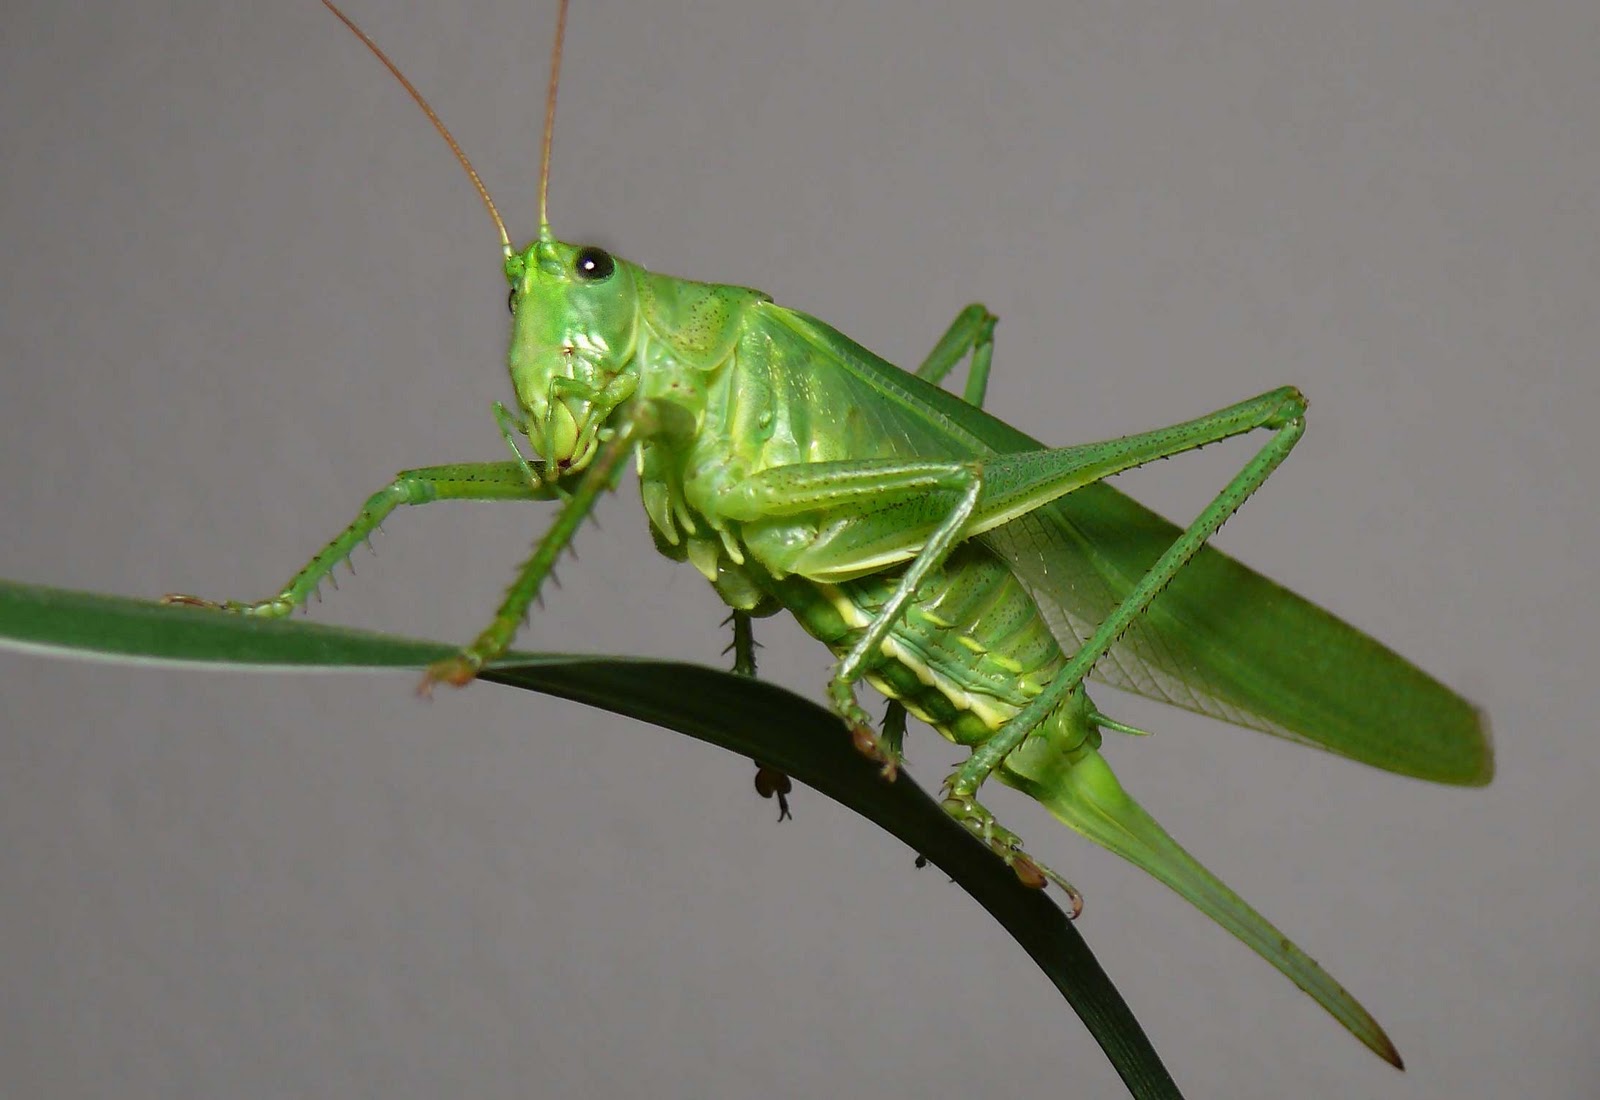 What are some of the characteristics of grasshoppers?